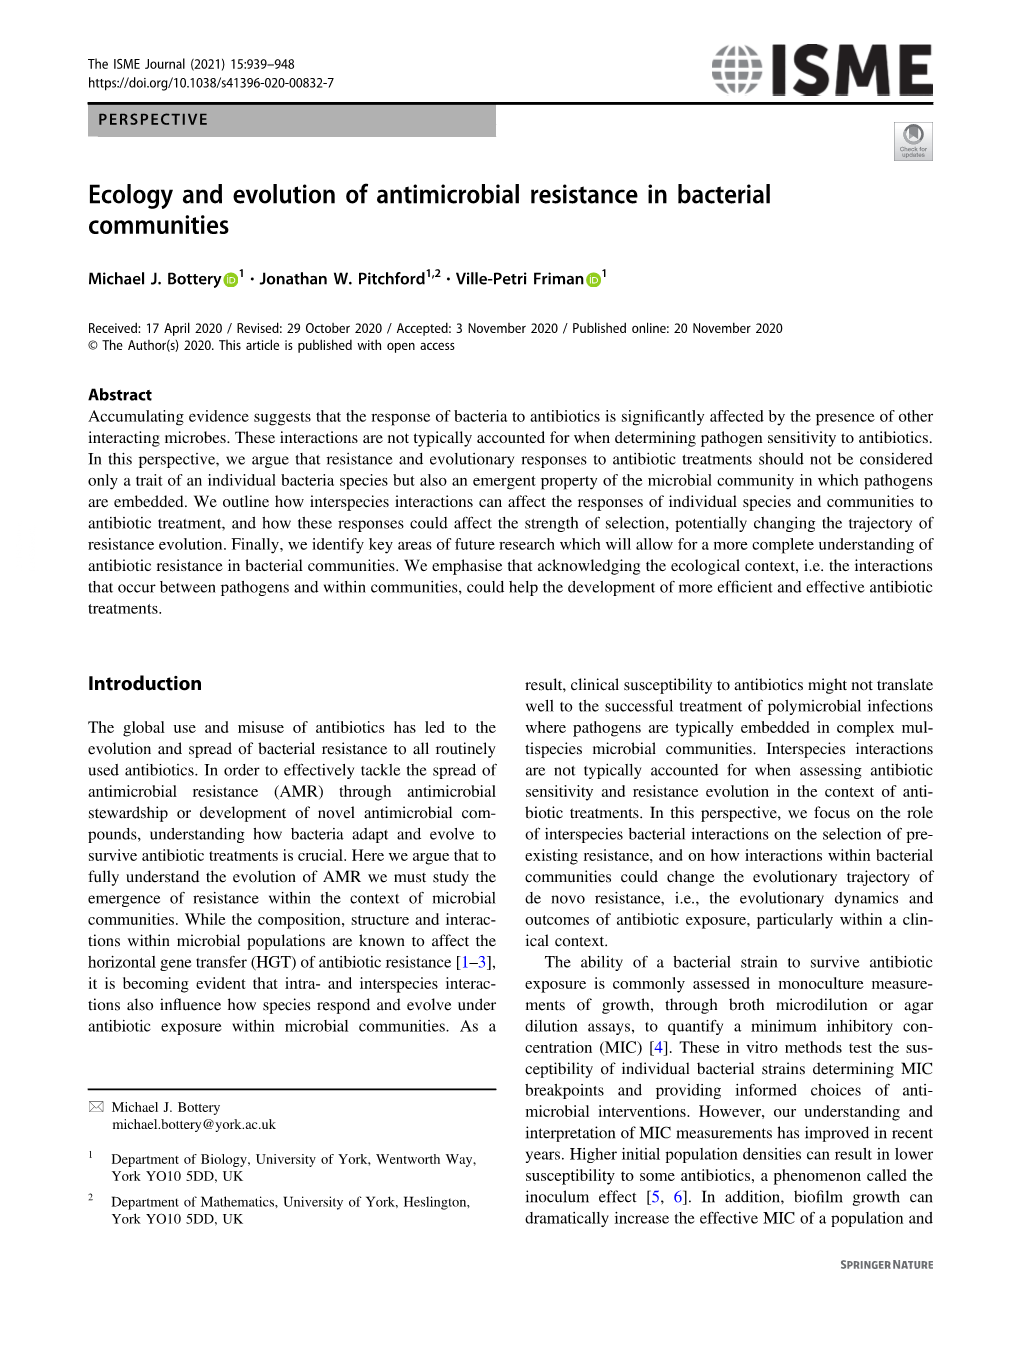 Ecology and Evolution of Antimicrobial Resistance in Bacterial Communities